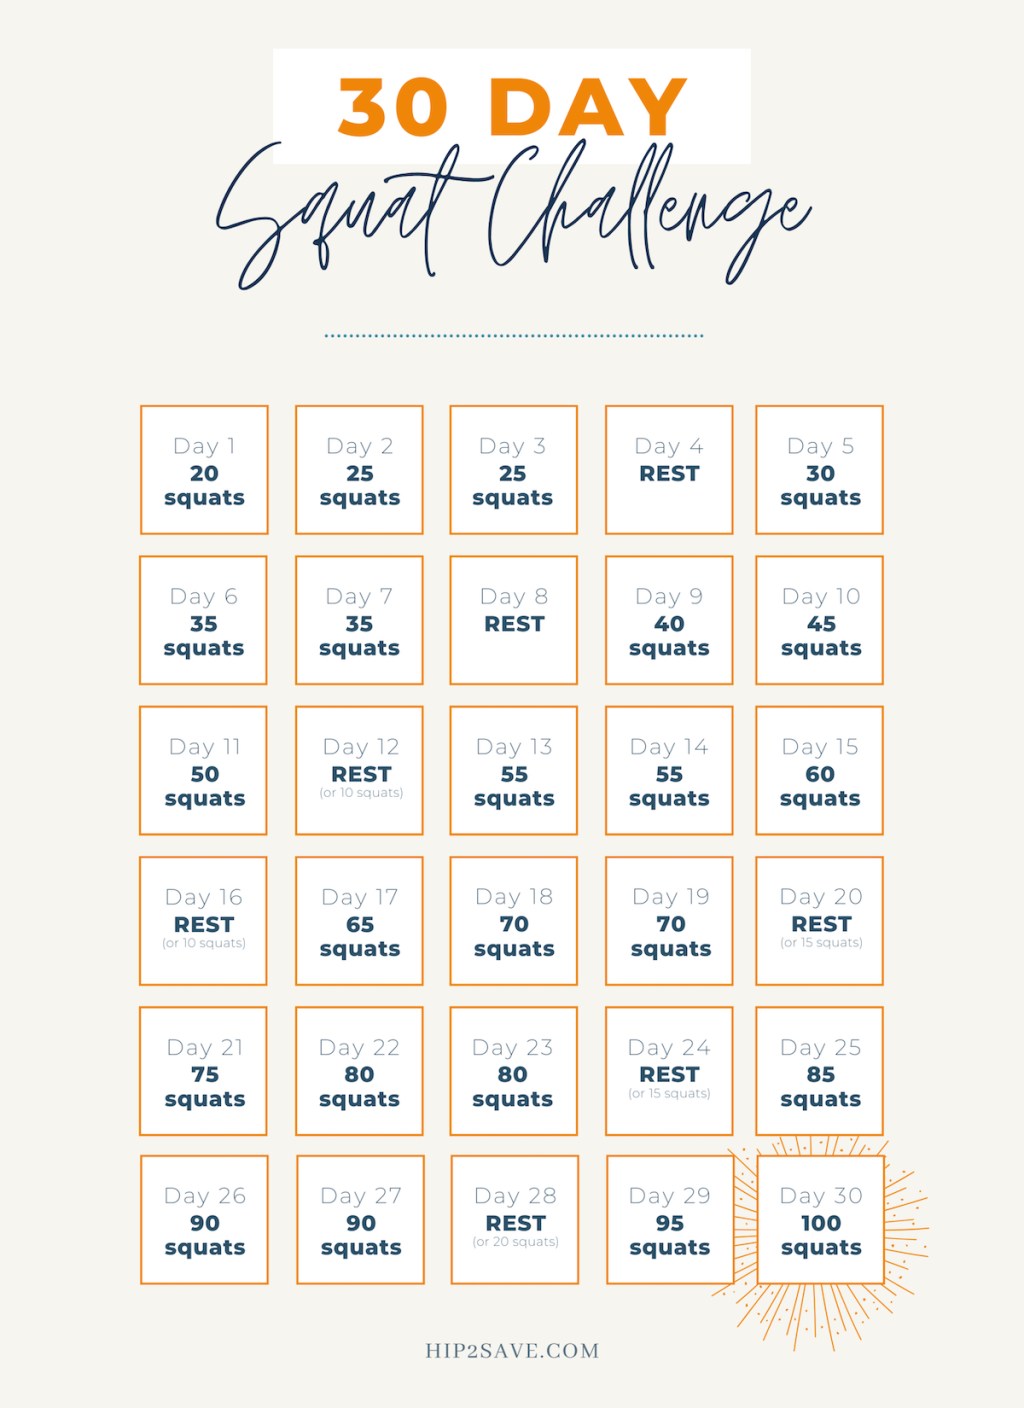 30 Day Squat Challenge Printable - Customize and Print